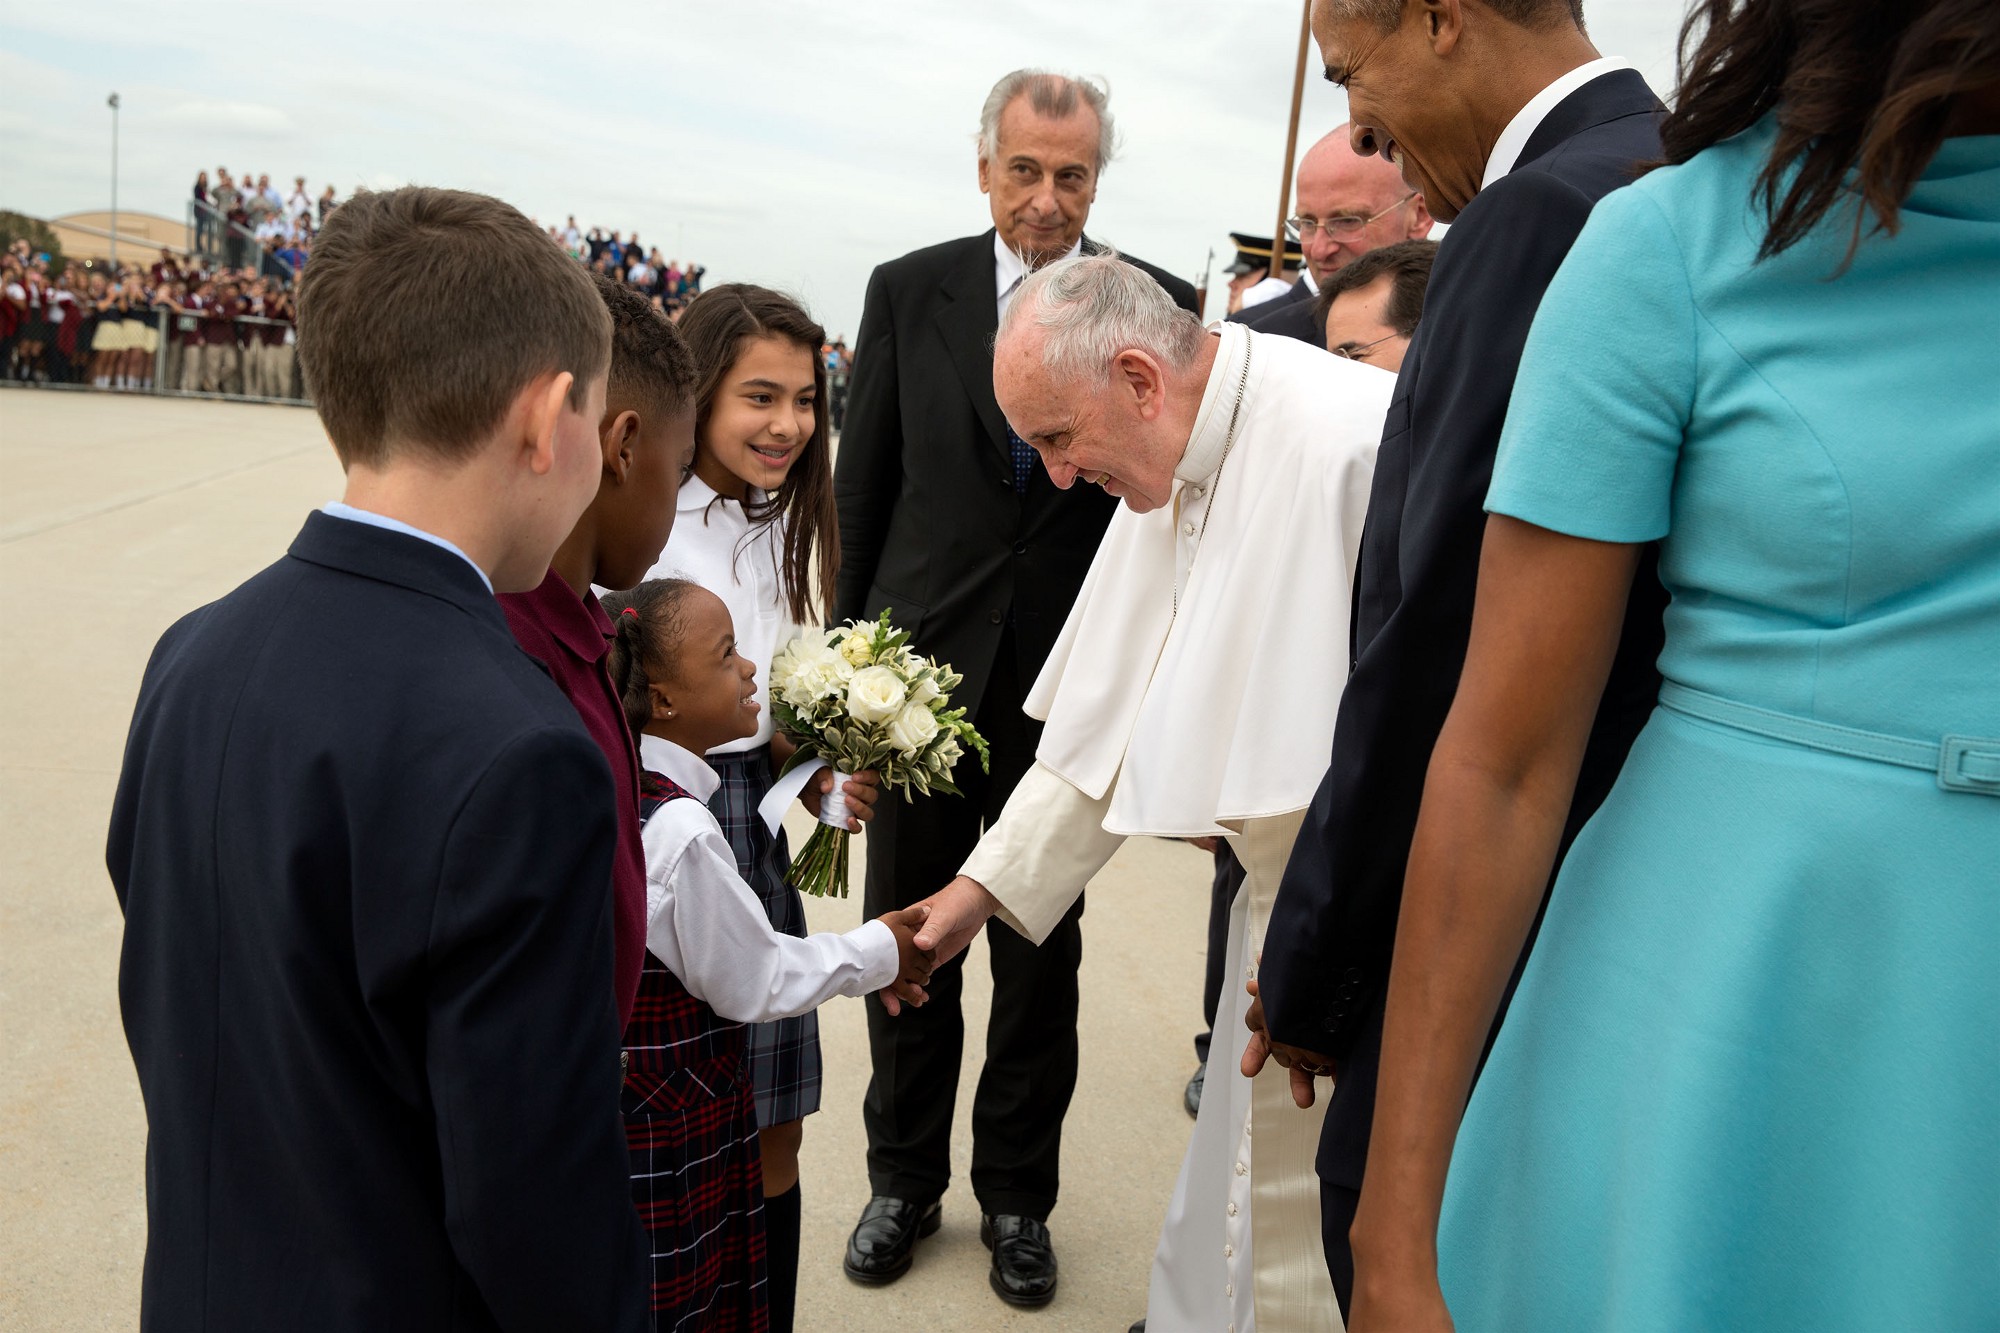 Pope Francis greets Catholic school children. (Official White House Photo by Pete Souza)